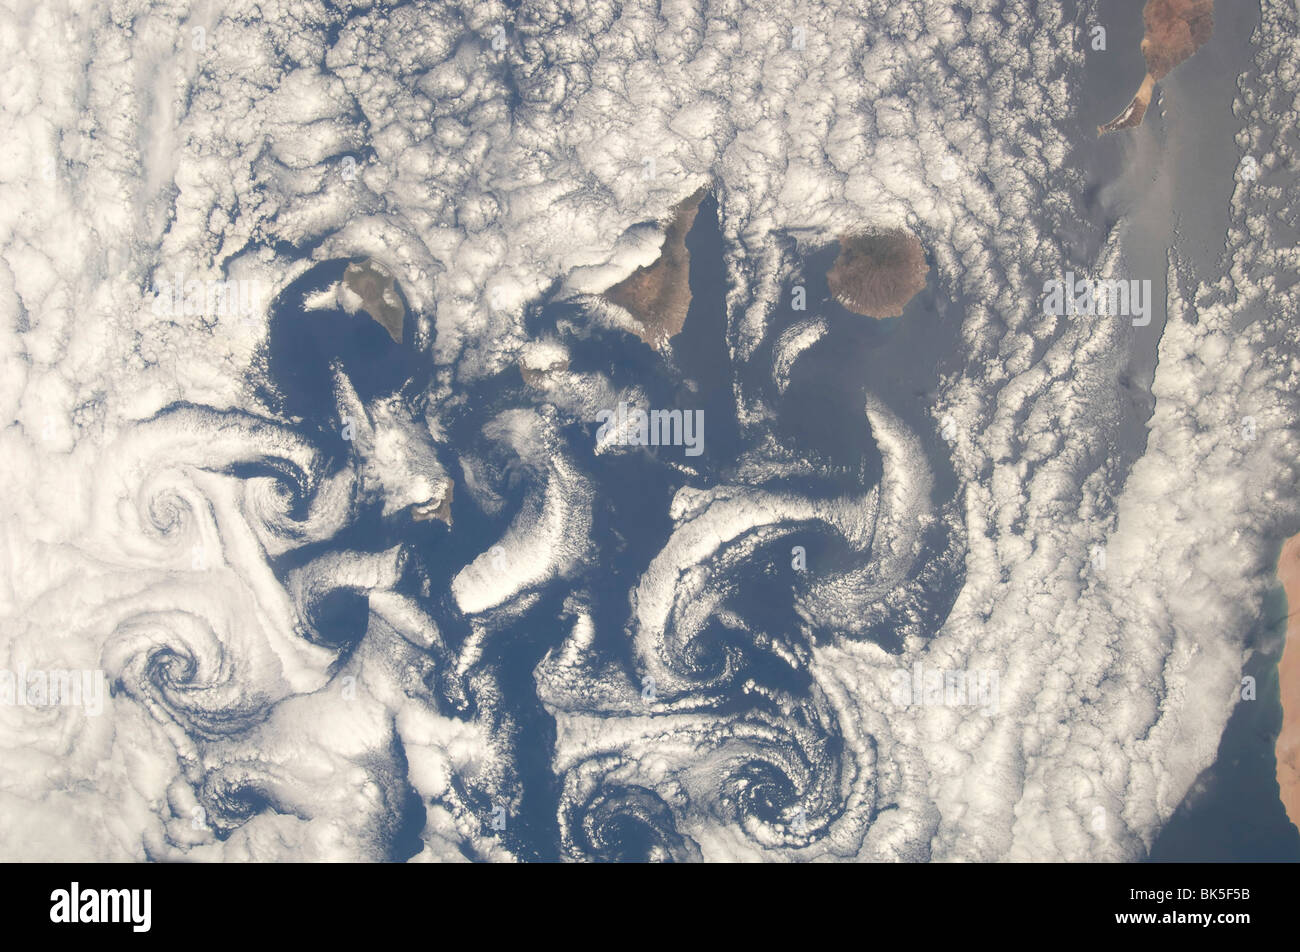 View of cloud vortices in the area of the Canary Islands, North Atlantic Ocean Stock Photo